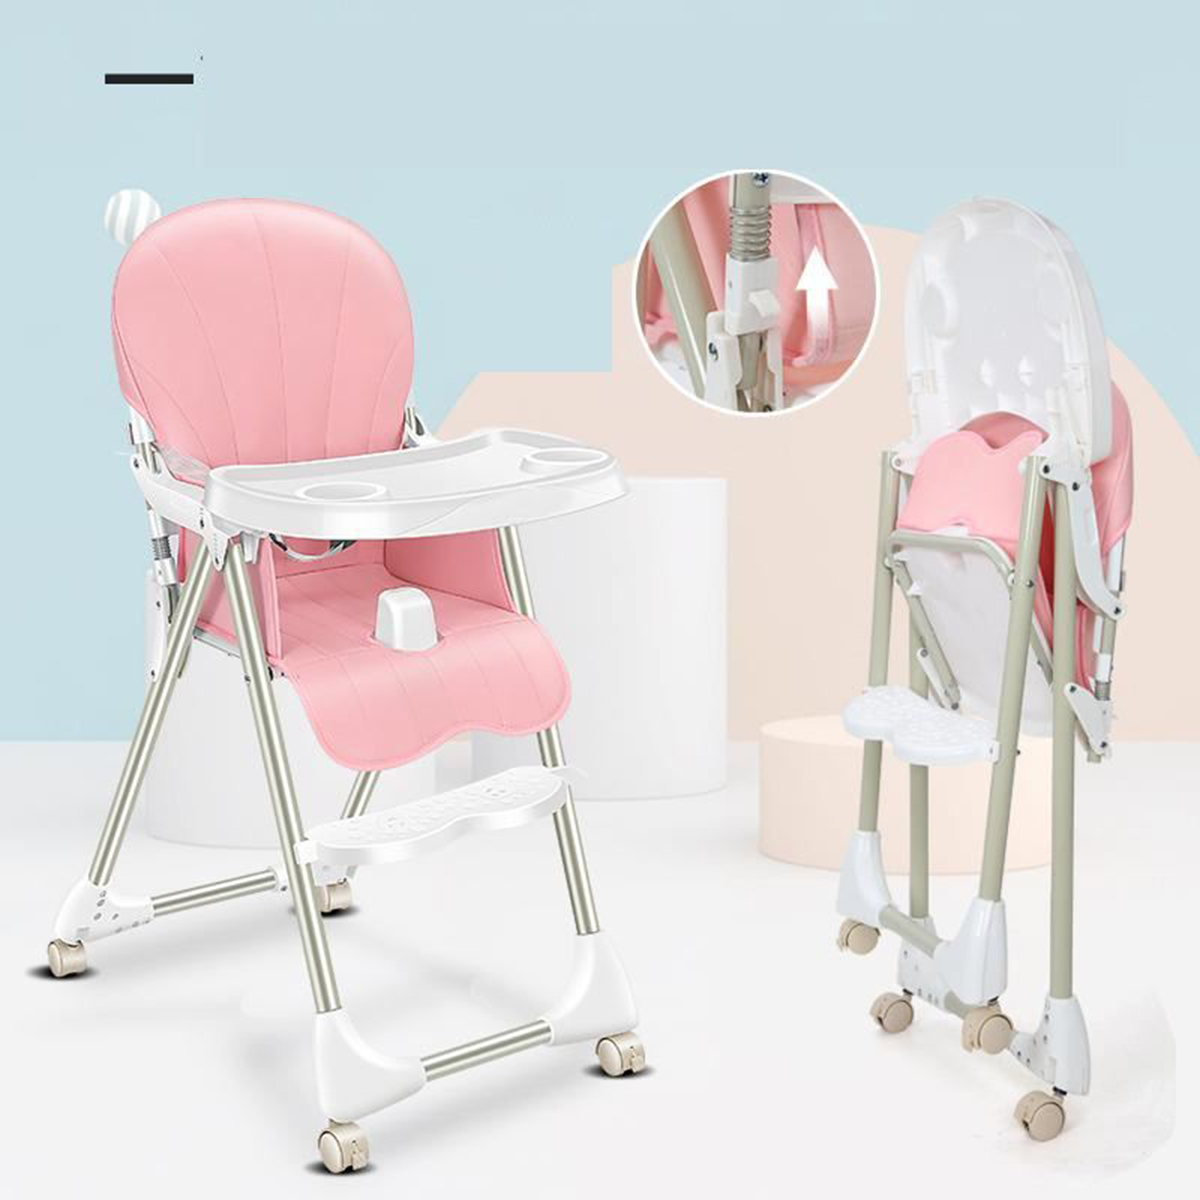 Ditong-Portable-Folding-Baby-High-Chair-Adjustable-Plate-Lockable-Wheels-PU-Seat-with-Environmental--1748389-3